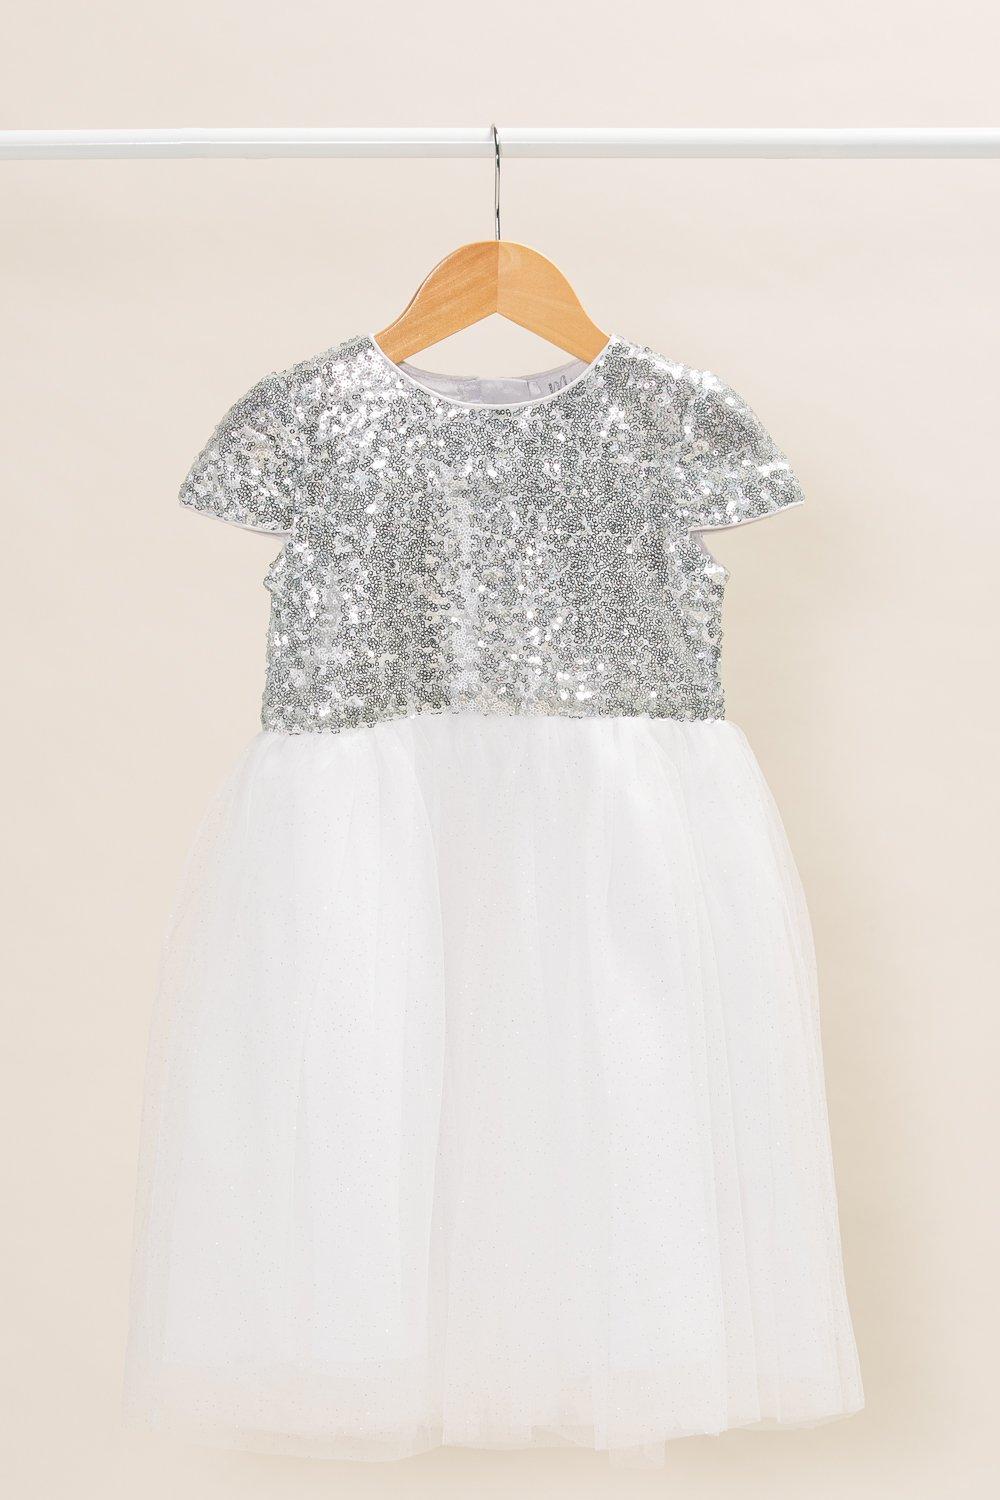 Sequin Top Waterfall Tulle Dress